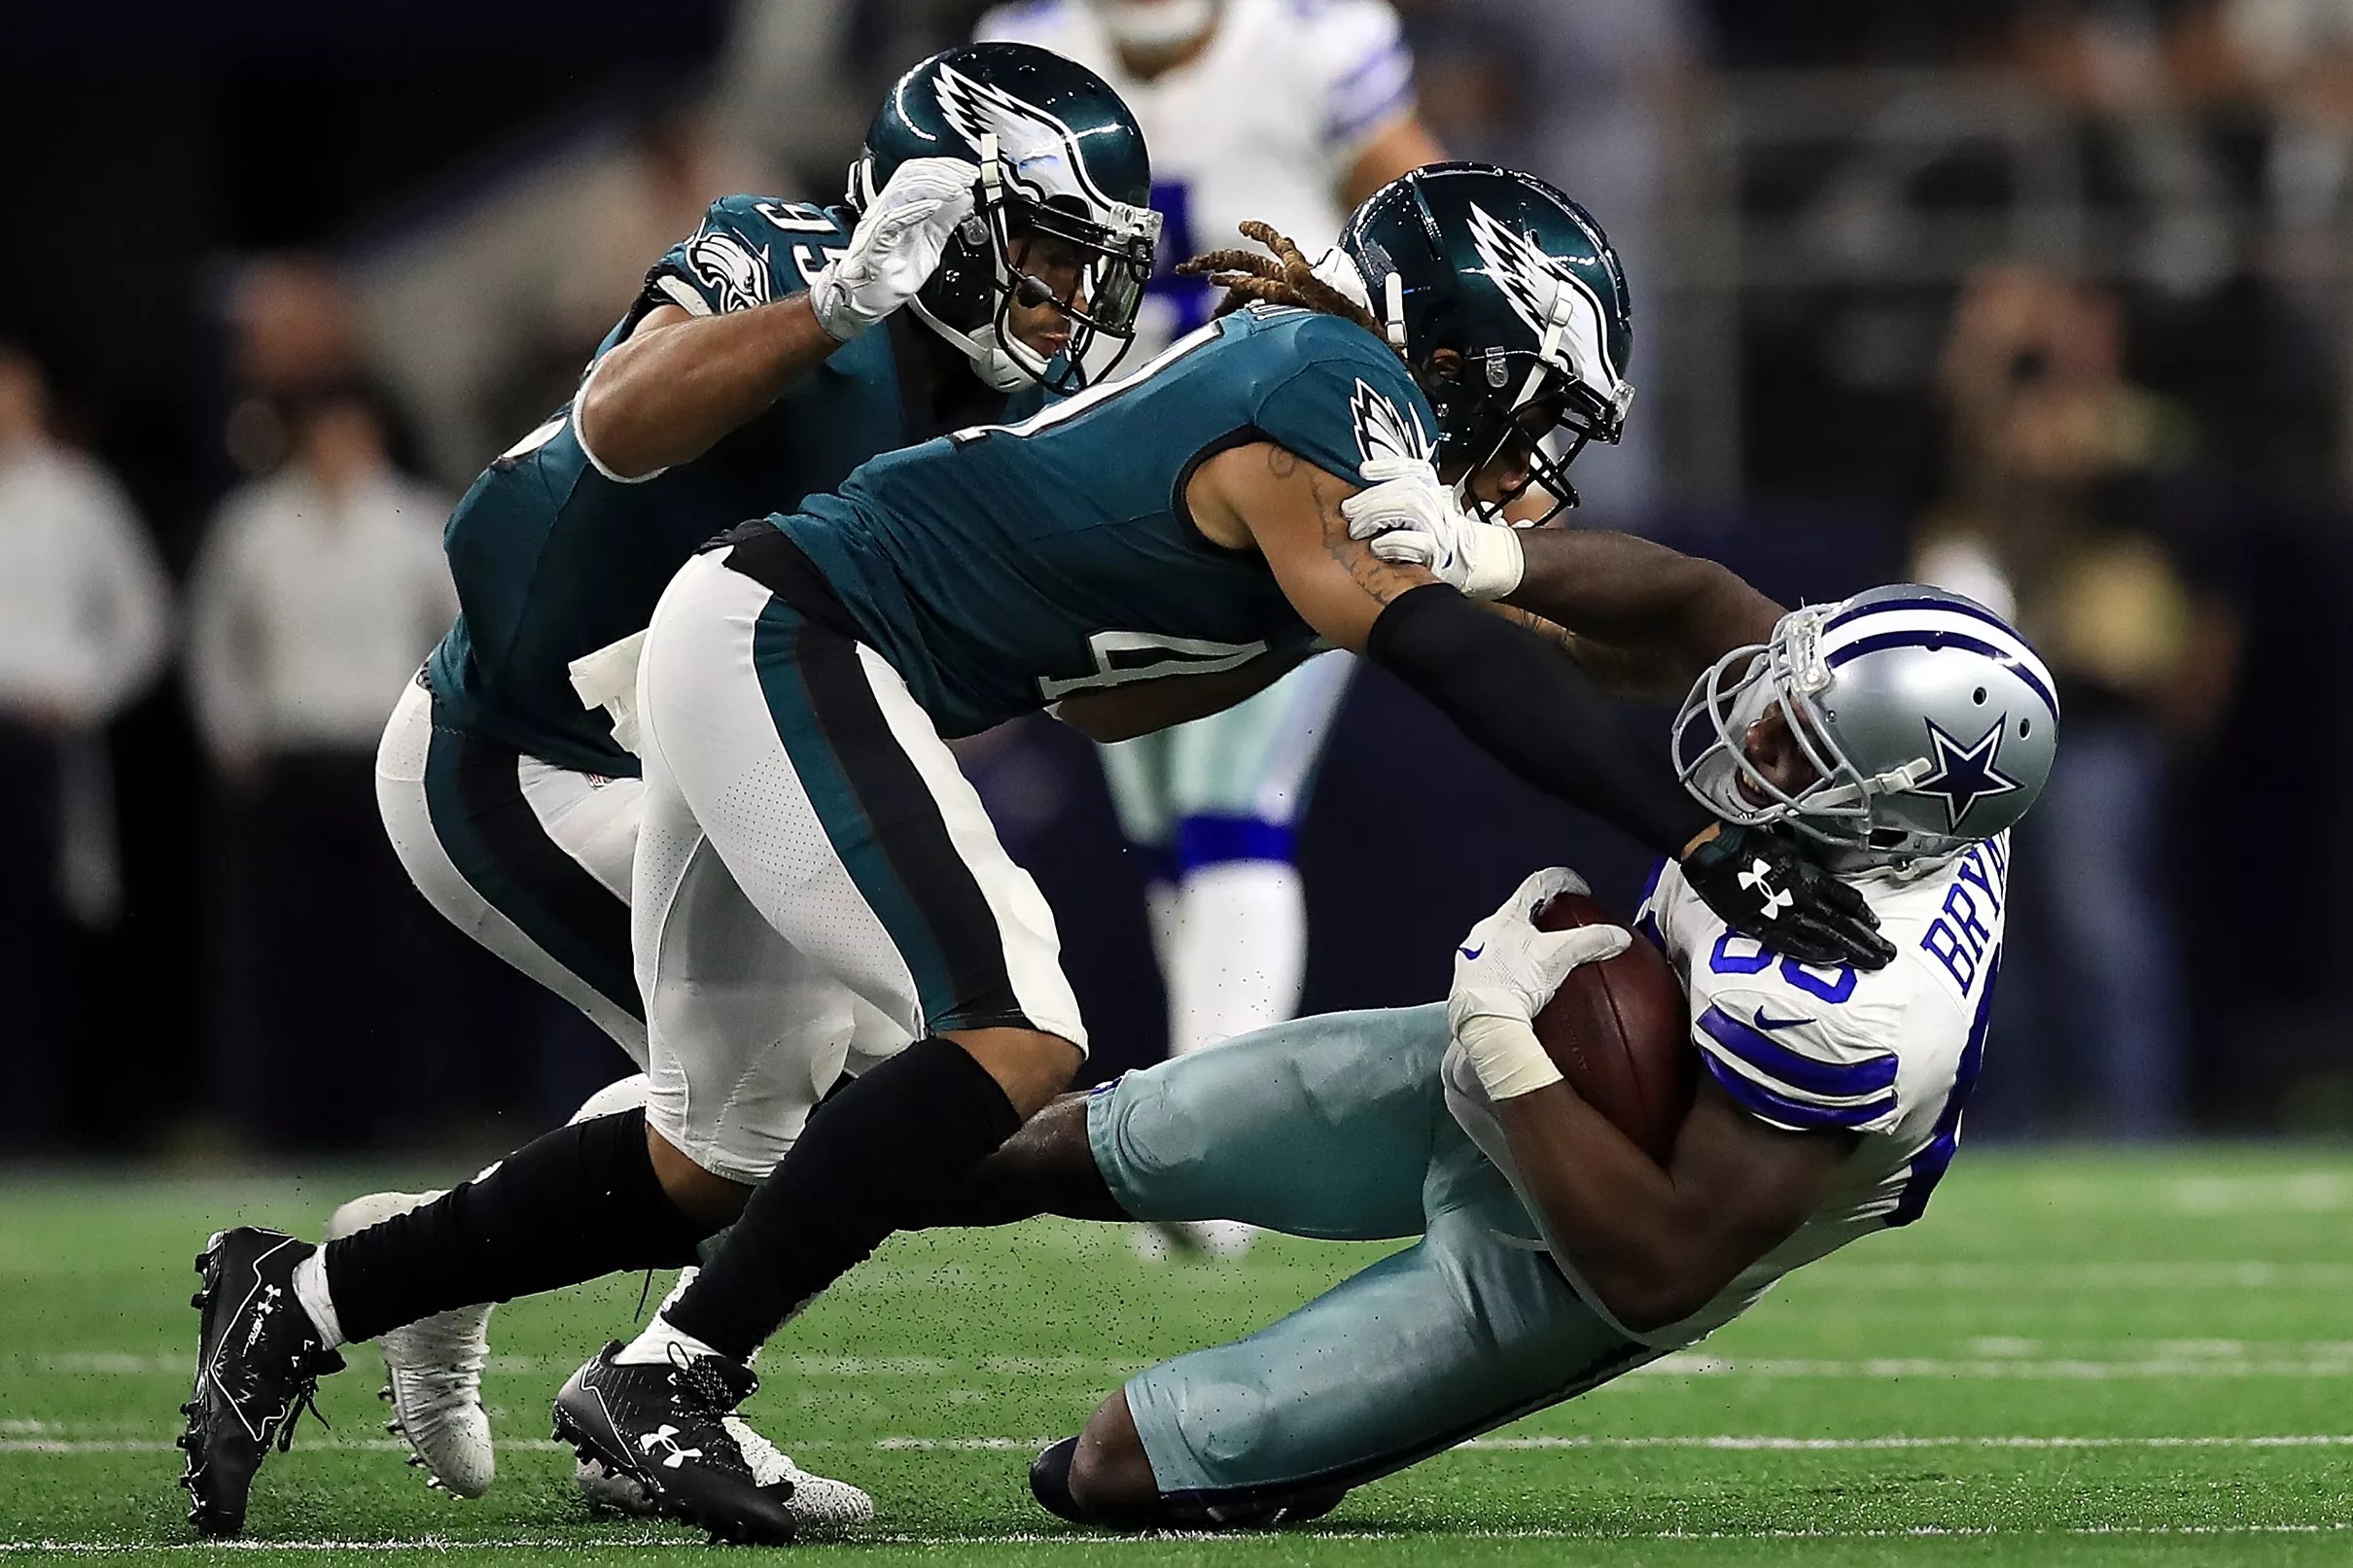 Previewing the Cowboys-Eagles game